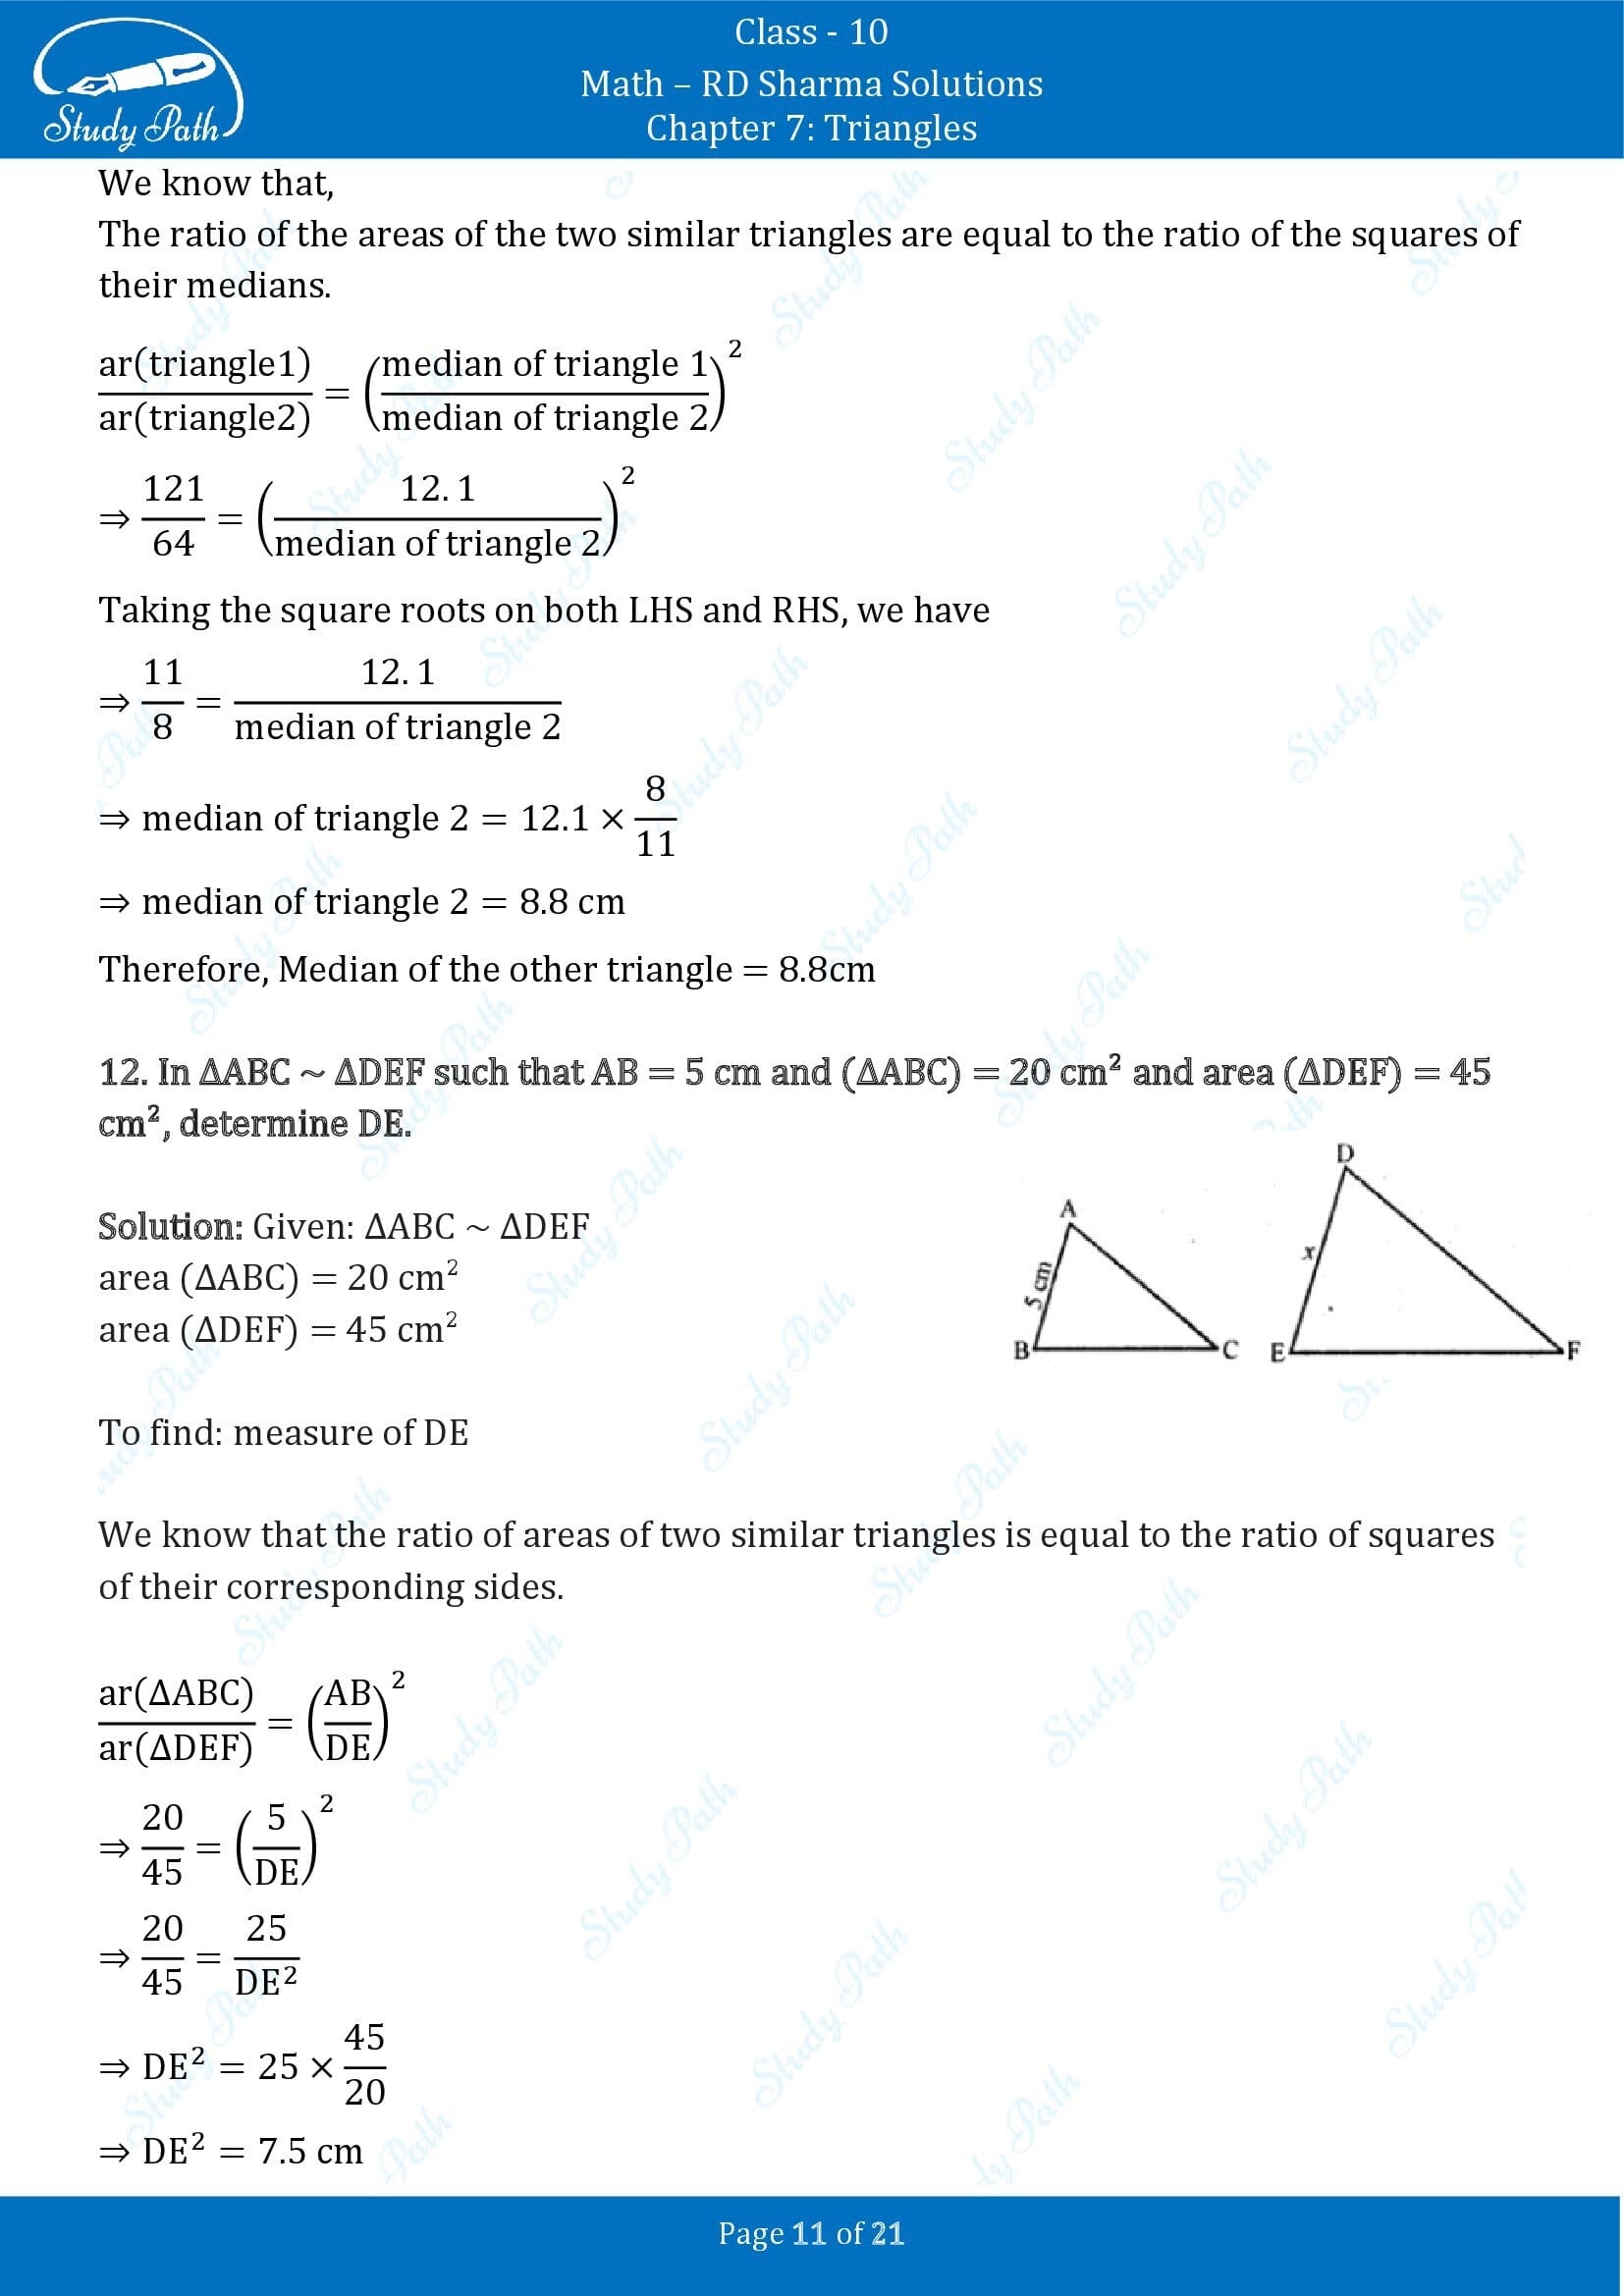 RD Sharma Solutions Class 10 Chapter 7 Triangles Exercise 7.6 00011